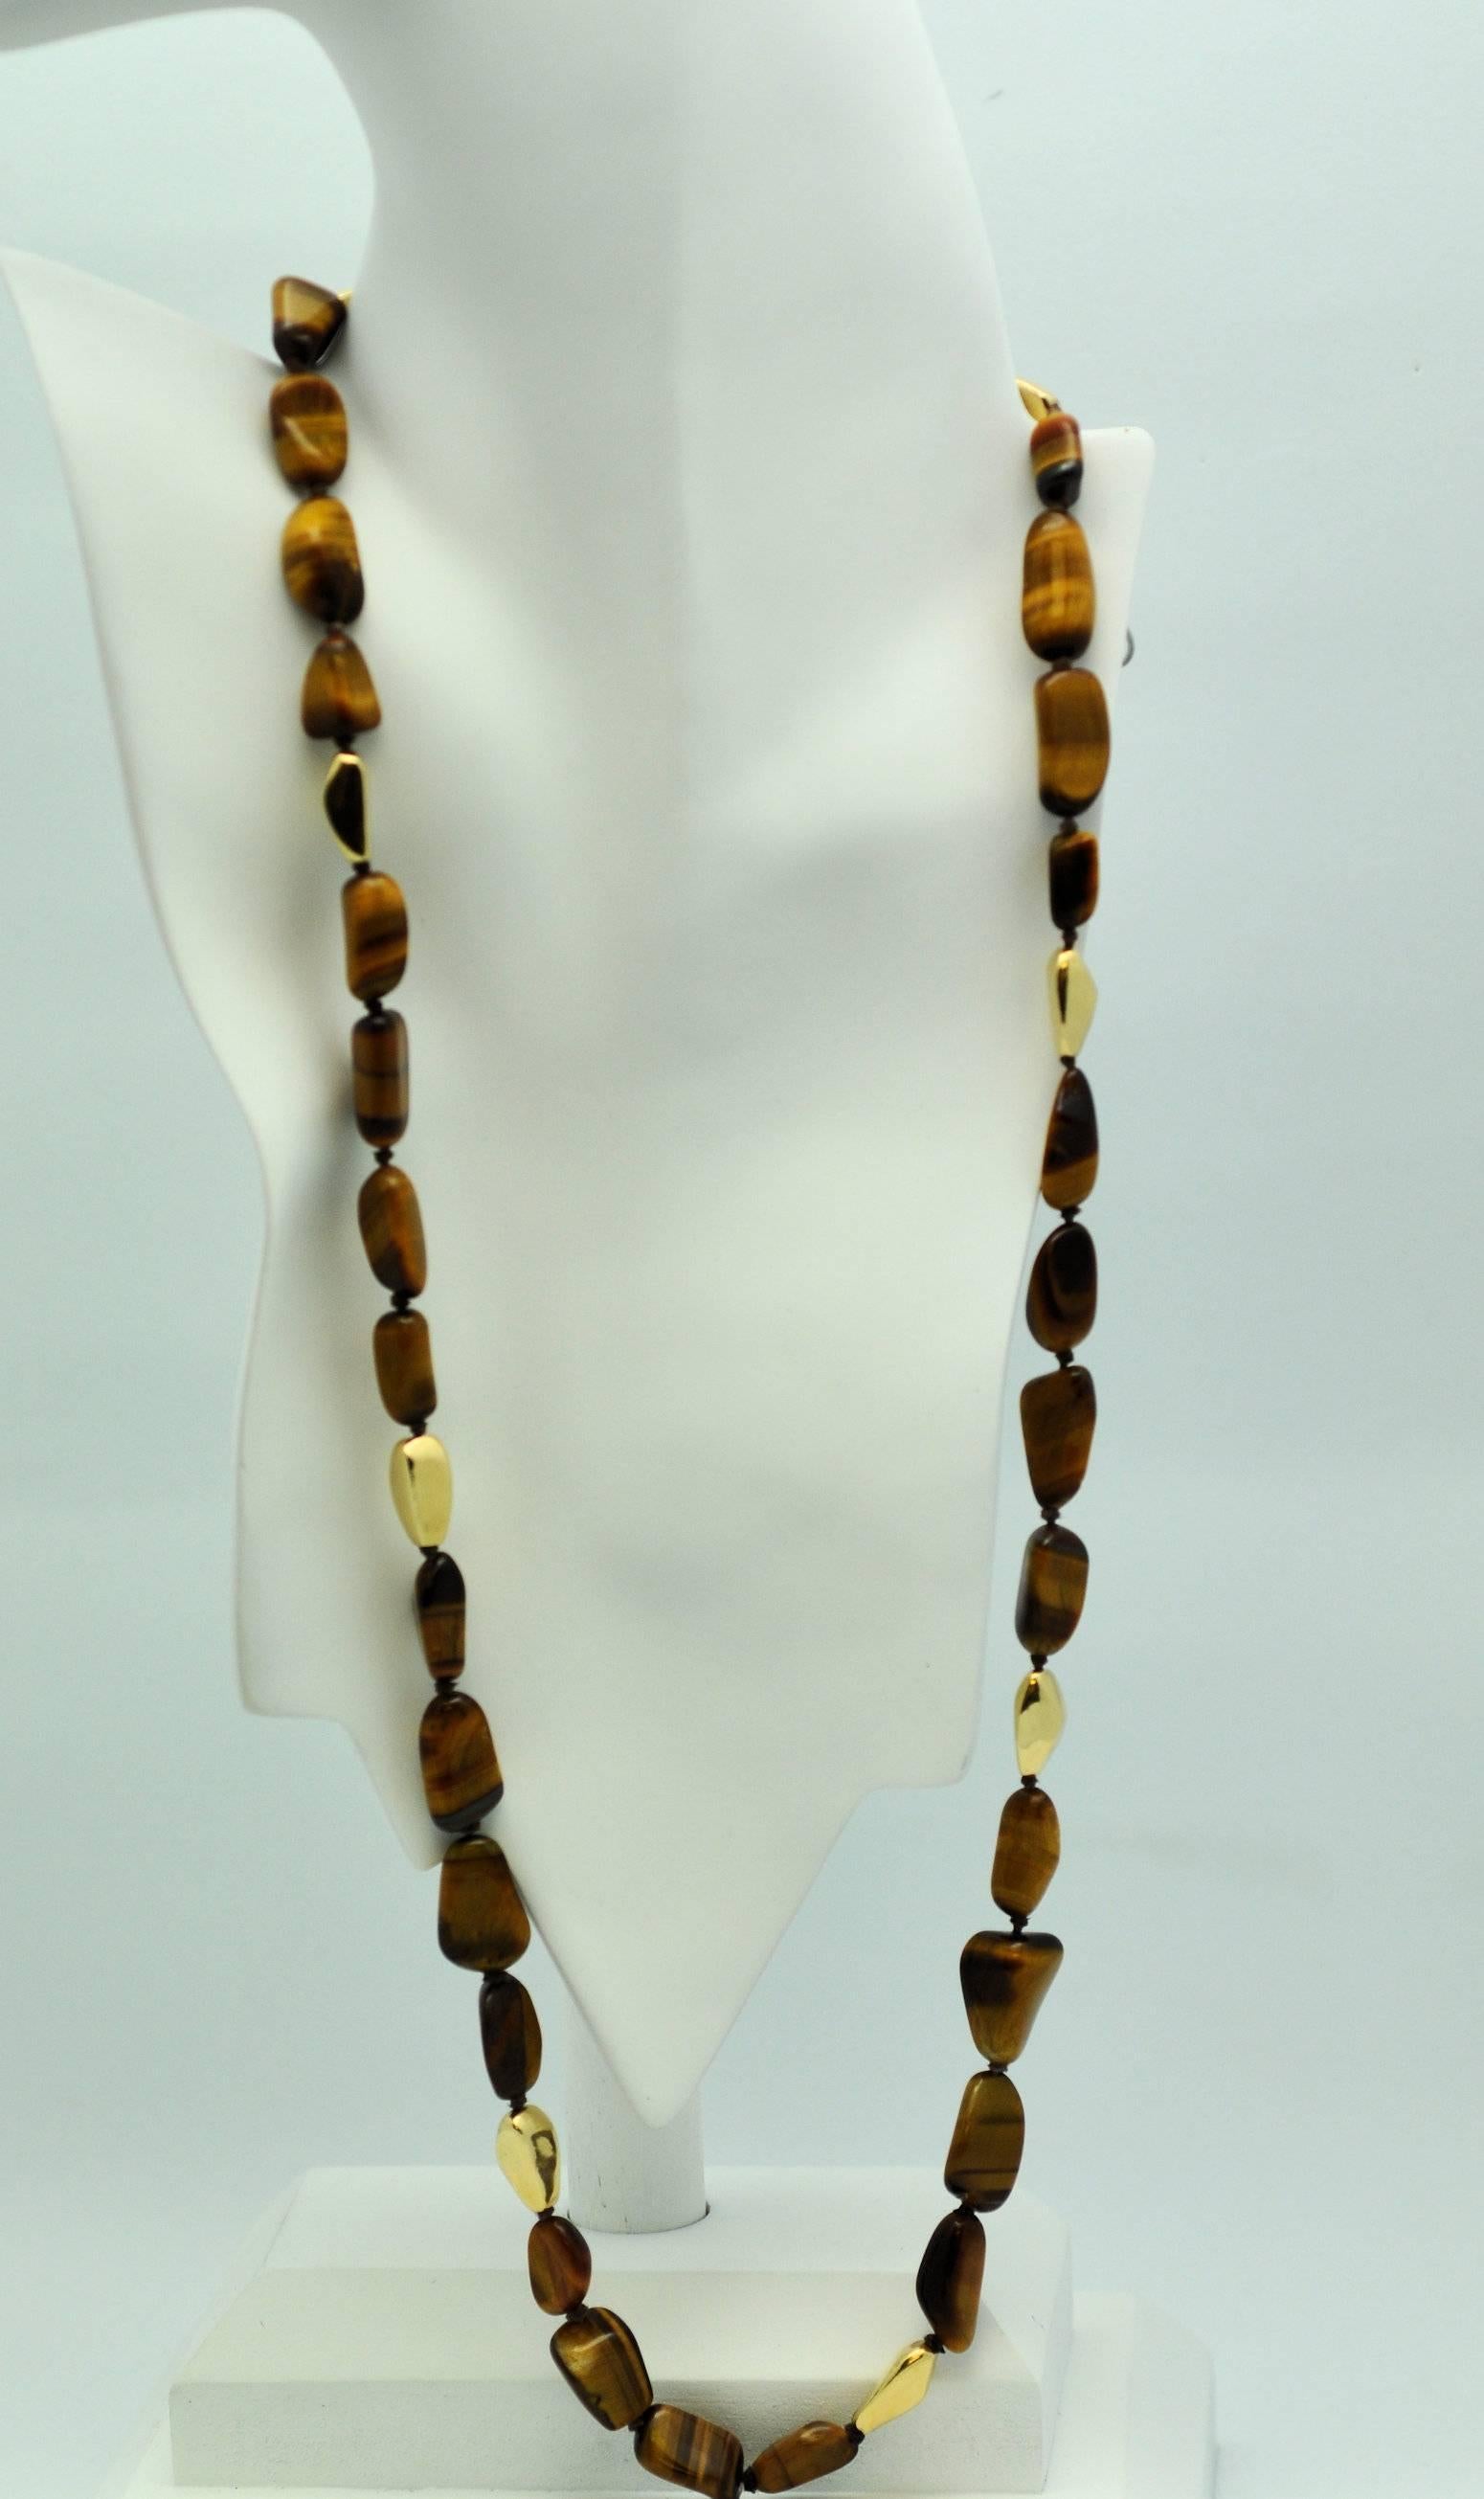 Long strand fine quality tigers eye baroque shape beads with matching shape gold bead necklace.  From VCA.  Rich golden-brown color. Strung continuously, no clasp.  30 inches long.  Perfect for fall. 